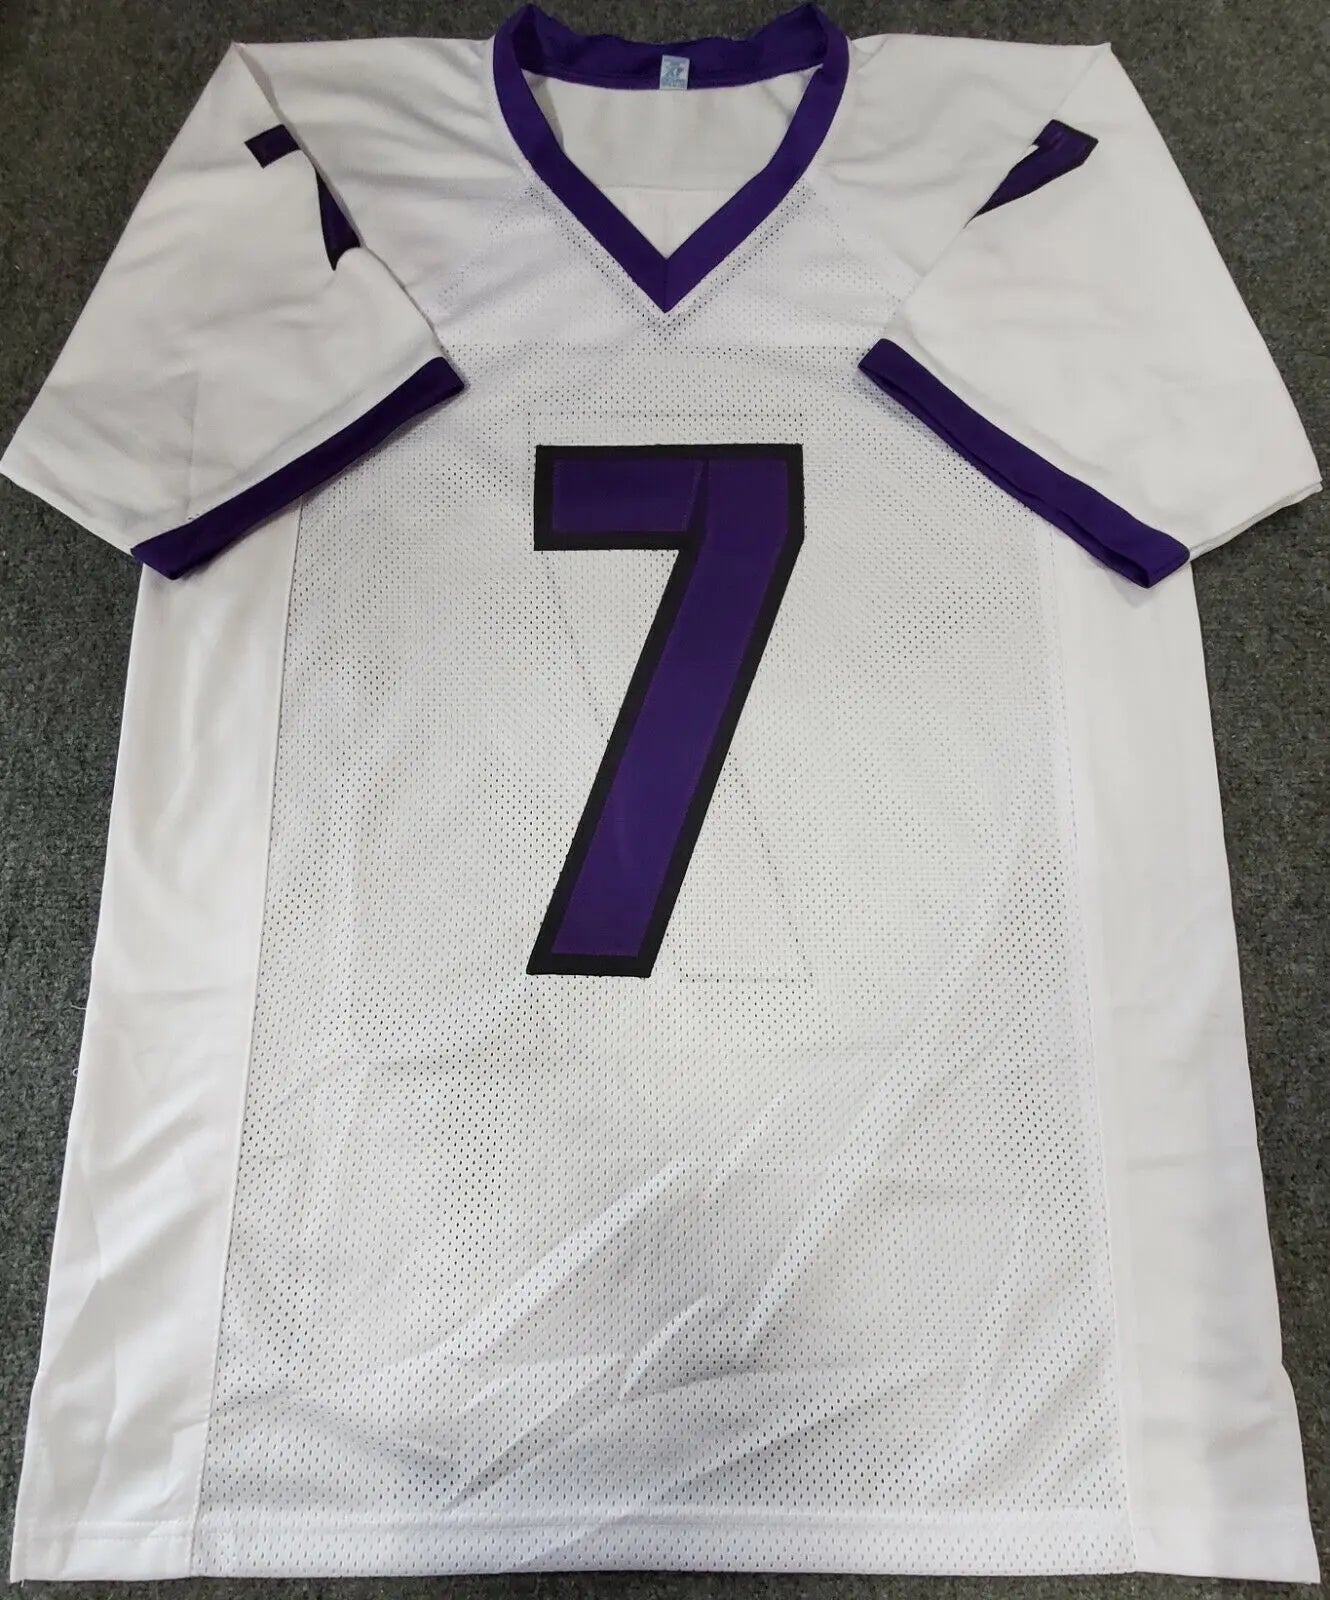 MVP Authentics Tcu Horned Frogs Tre'von Moehrig Autographed Signed Jersey Jsa Coa 135 sports jersey framing , jersey framing